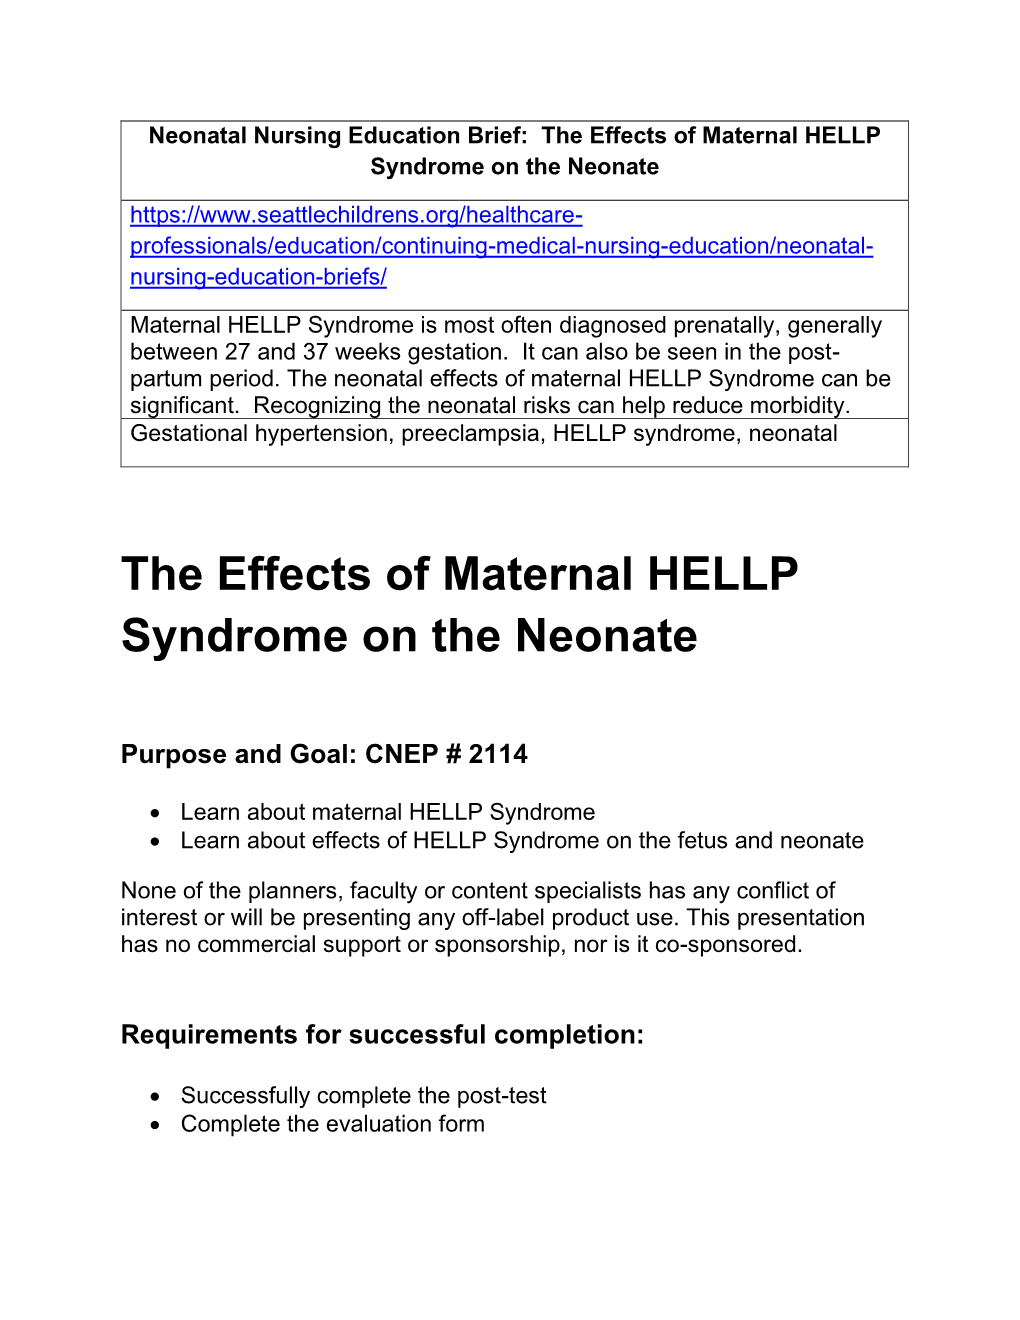 The Effects of Maternal HELLP Syndrome on the Neonate